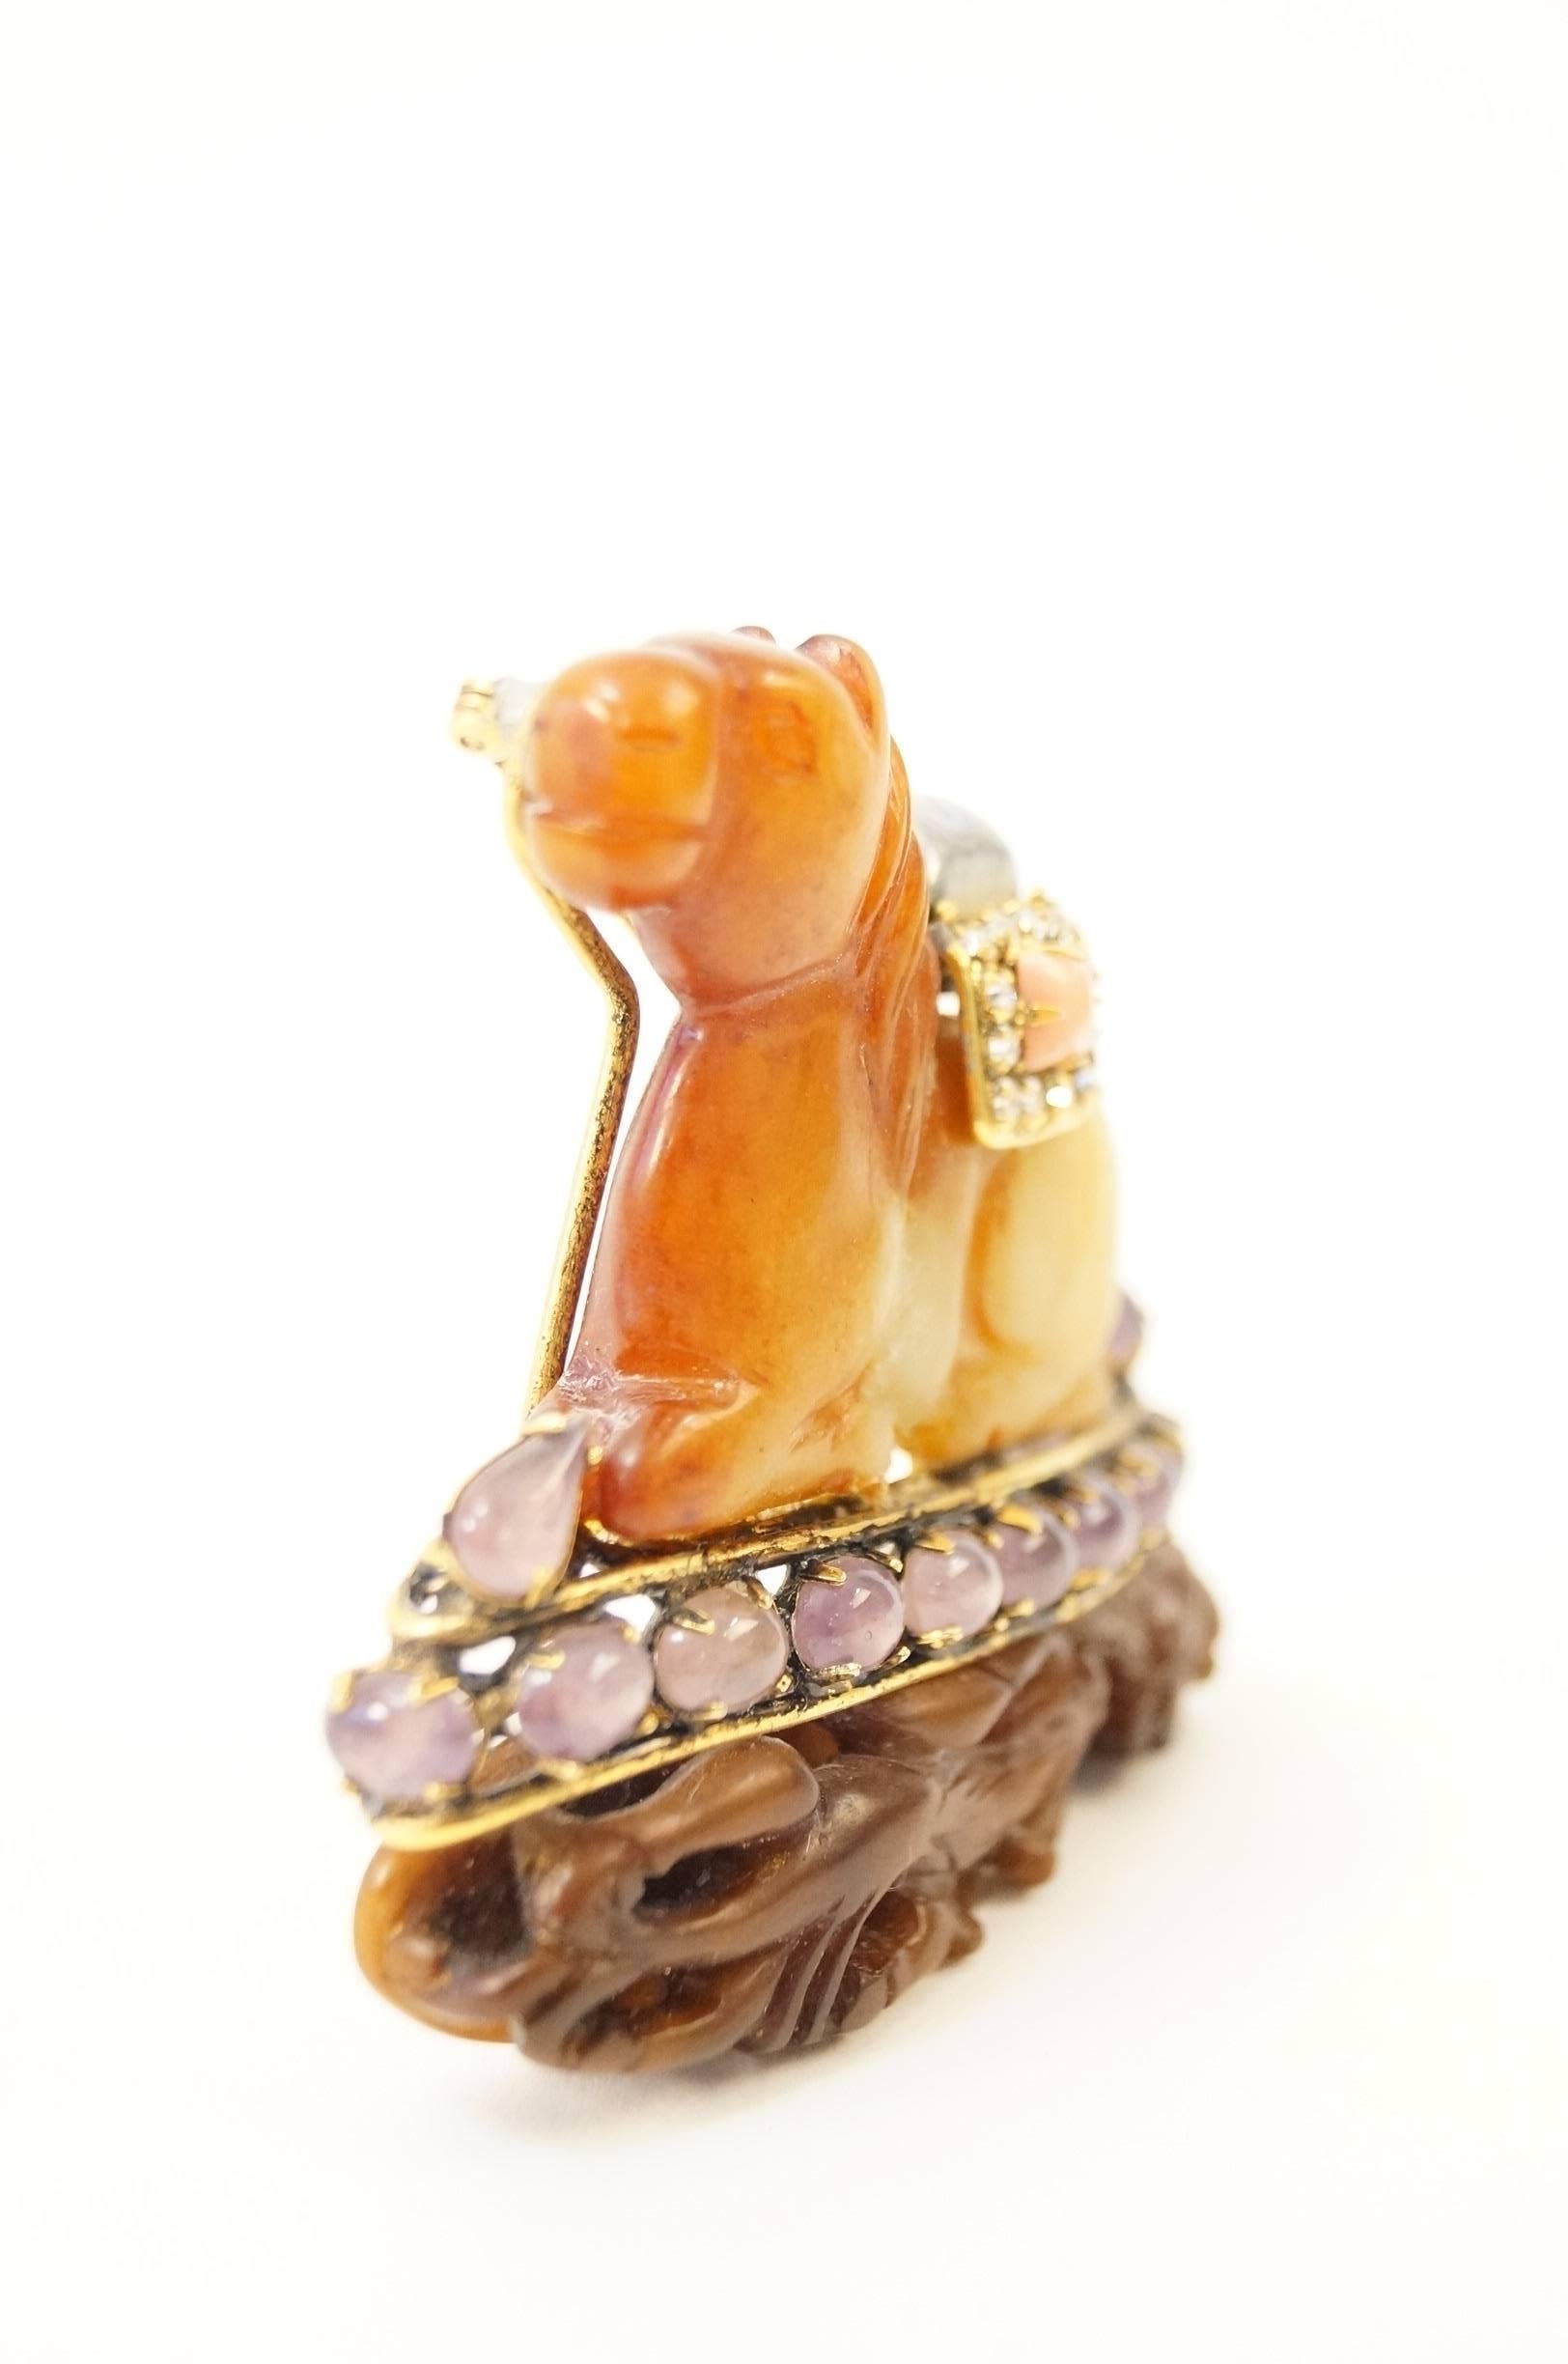 
This brooch by Iradj Moini is a tremendously beautiful piece of art. The brooch is composed of a antique agate piece formed into a horse siting on top of a soapstone dragon. The horse and dragon are separated by a row of oval amethyst cabochons.